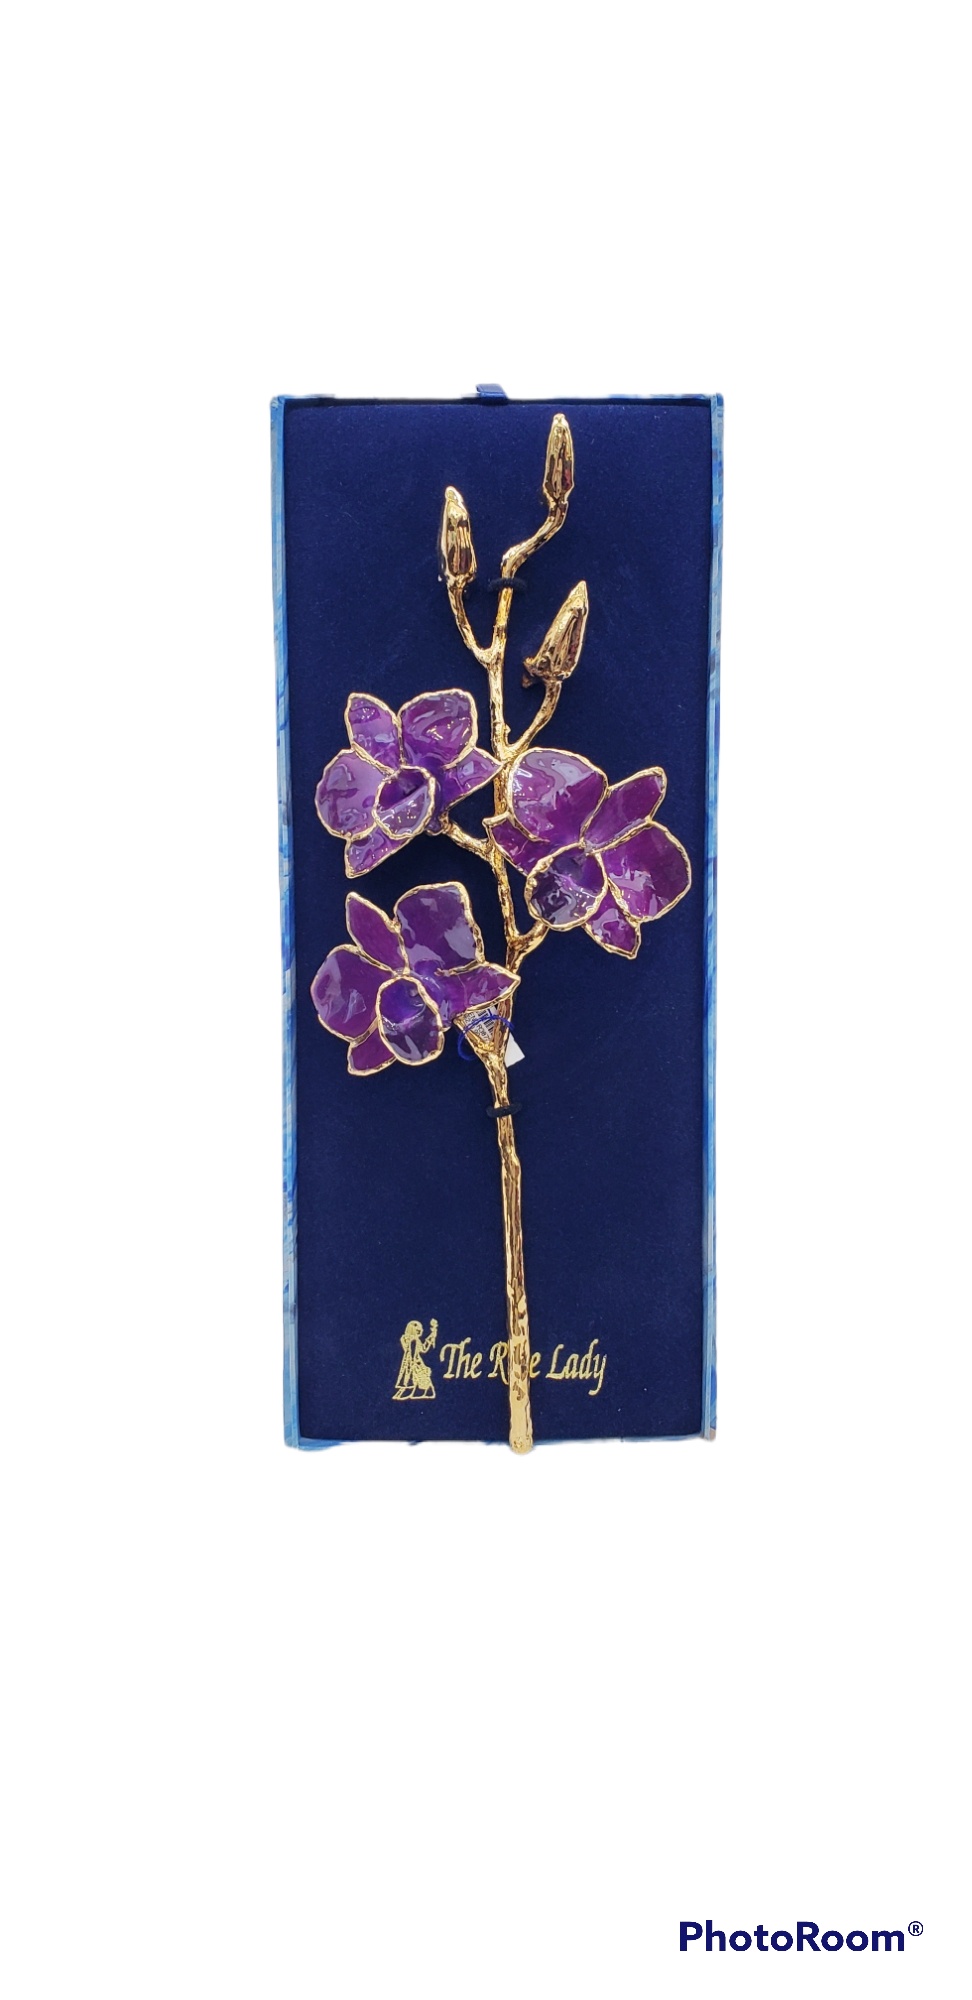 Lacquer Dipped Gold Trimmed Purple Real Dendrobium Orchid Stem